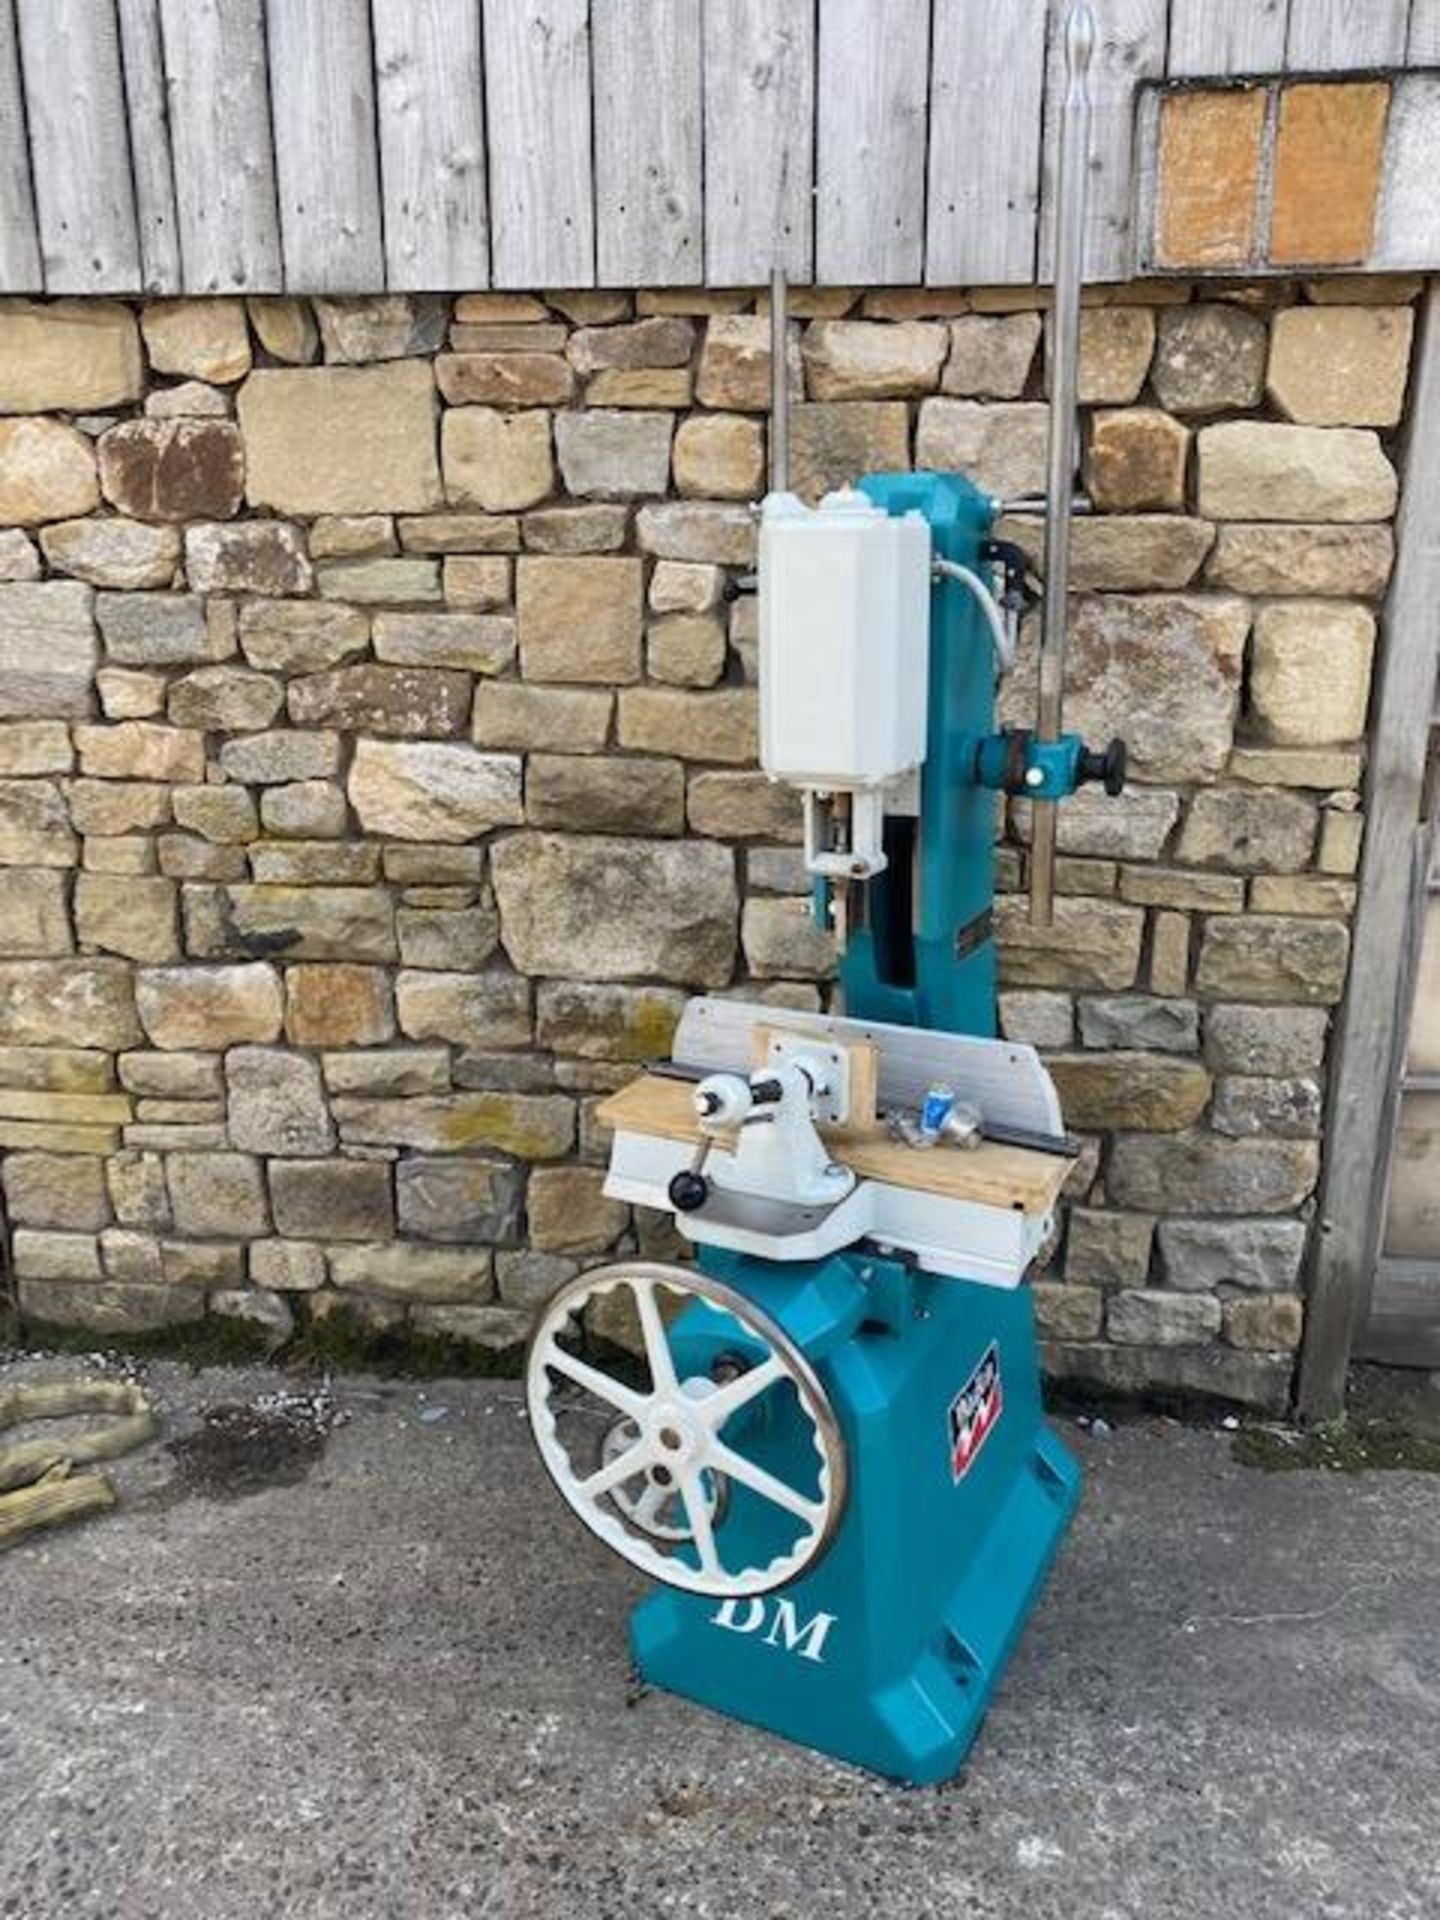 Wadkin DM Morticer (refurbished - very nice condition), serial no. 834184, 1.5kW motor (2hp), with